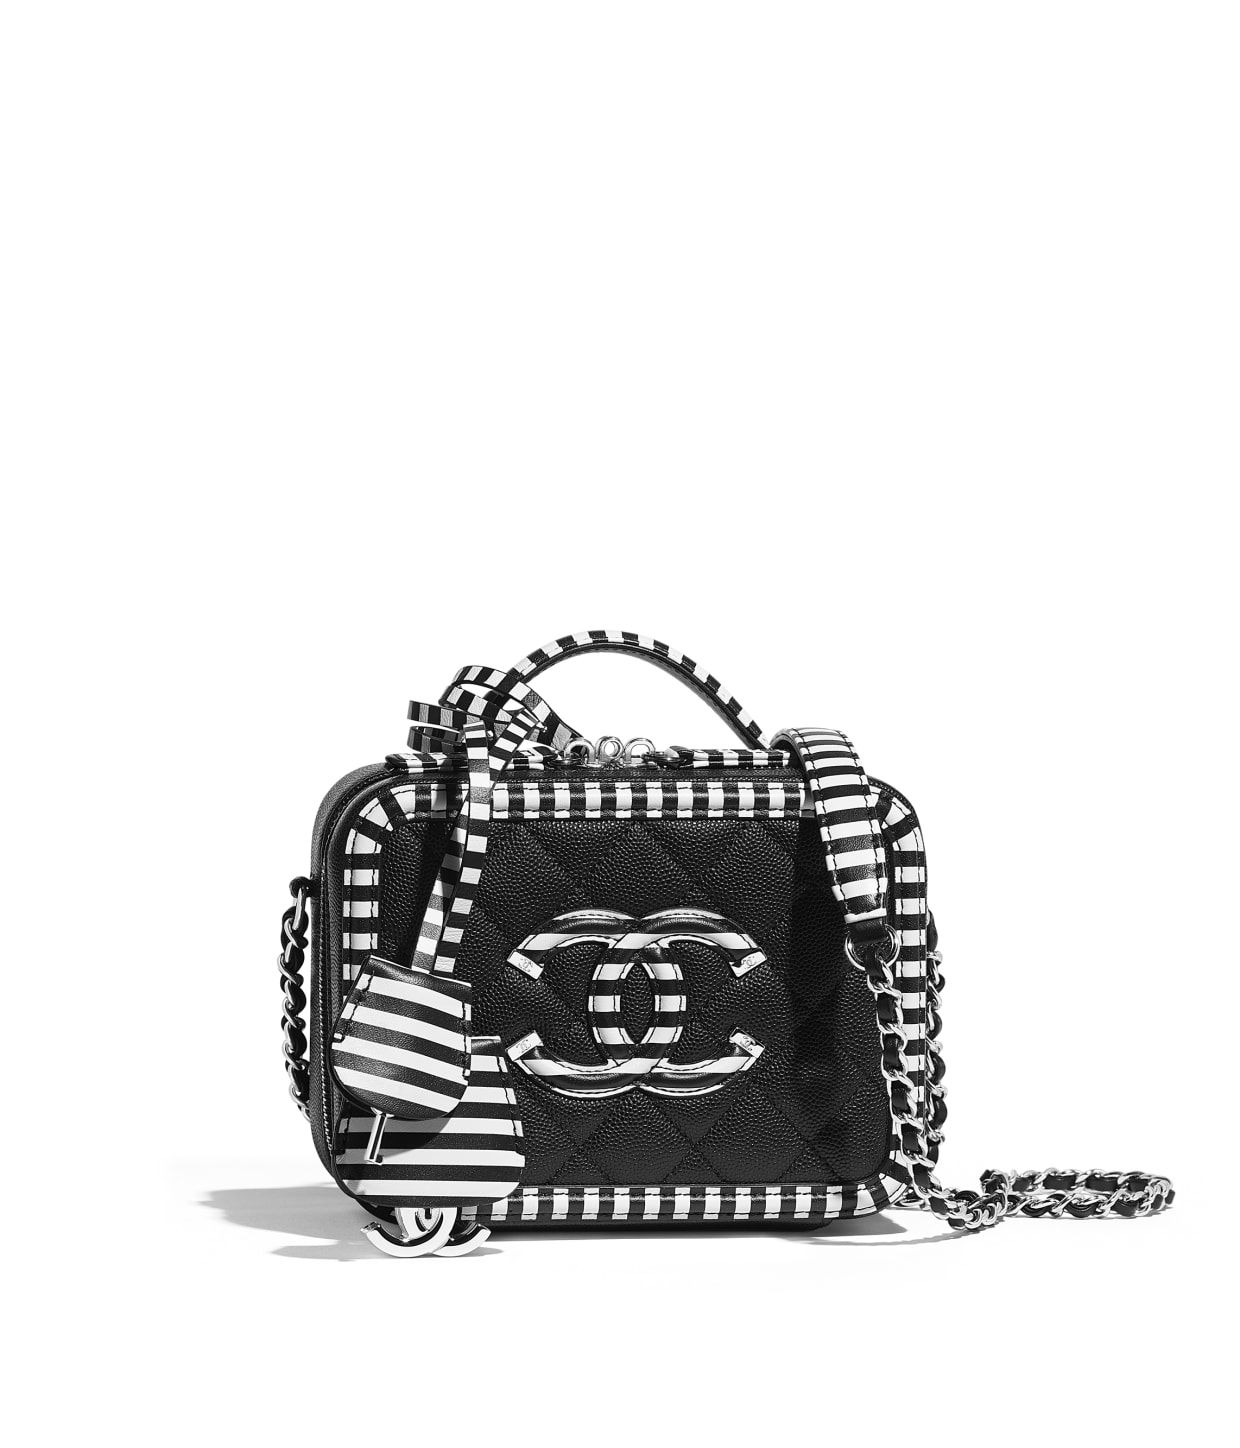 Grained Calfskin & Silver-Tone Metal Black & White Small Vanity Case | CHANEL | Chanel, Inc. (US)